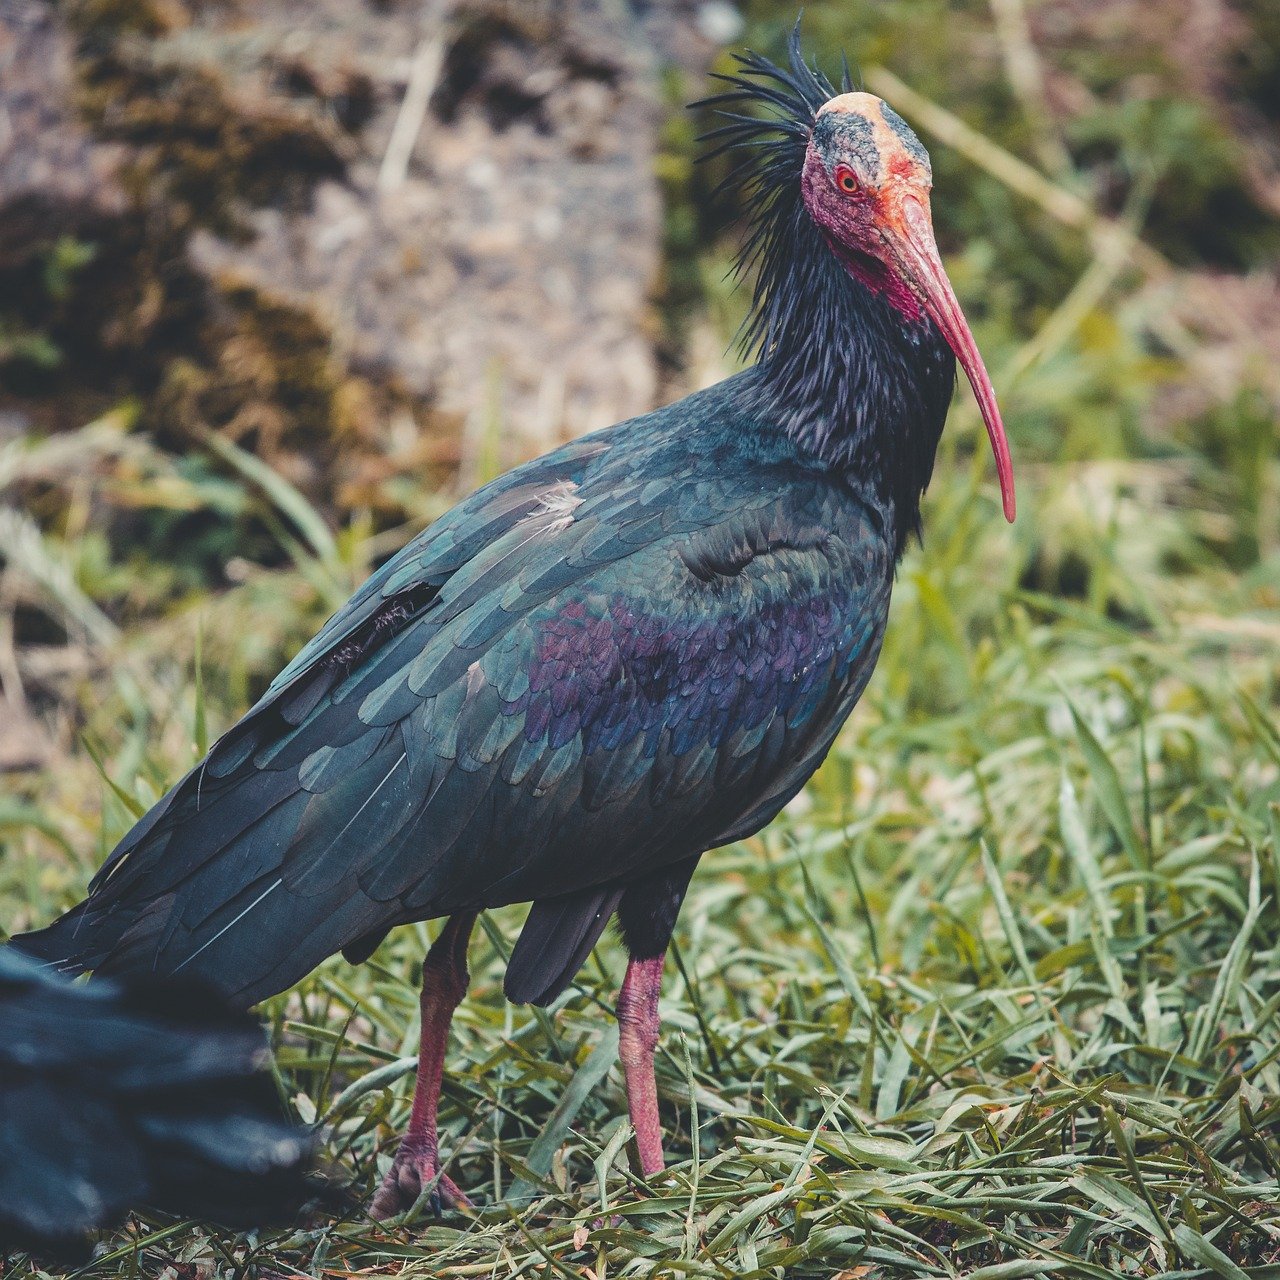 The Northern Bald Ibis, a bird known for its dark feathers and distinctive bald red head, had vanished from Europe centuries ago.